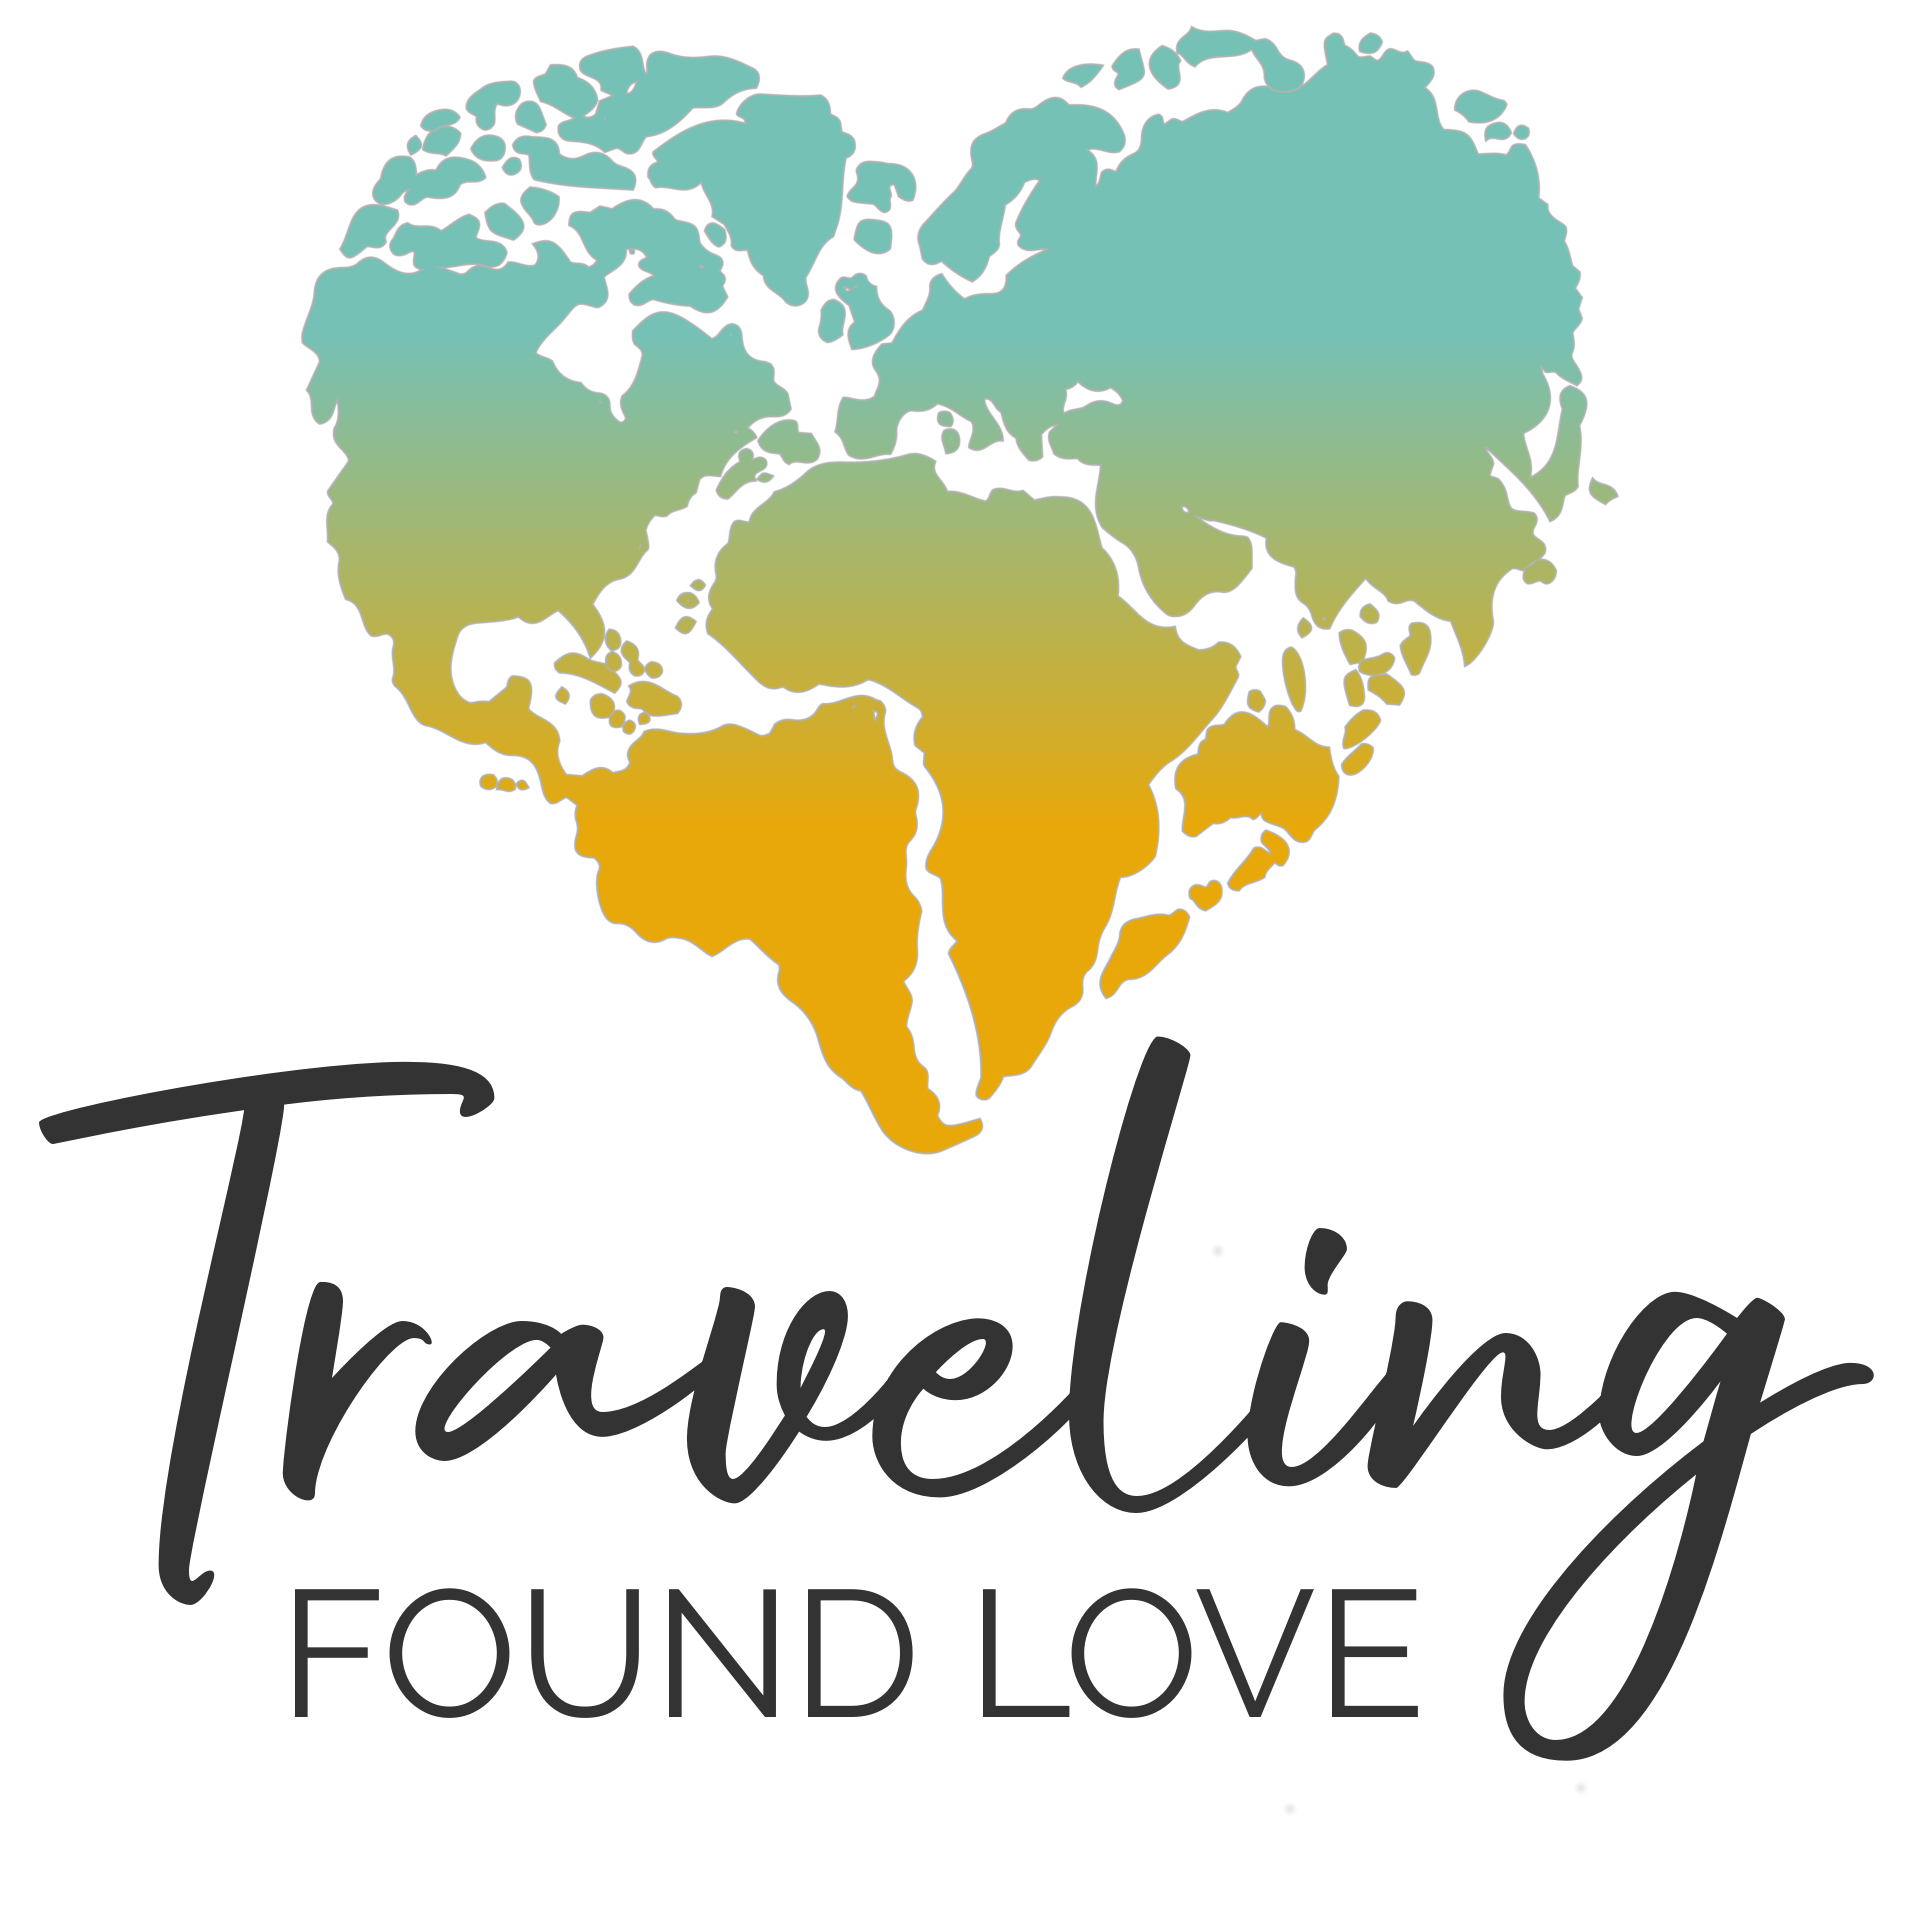 Traveling Found Love